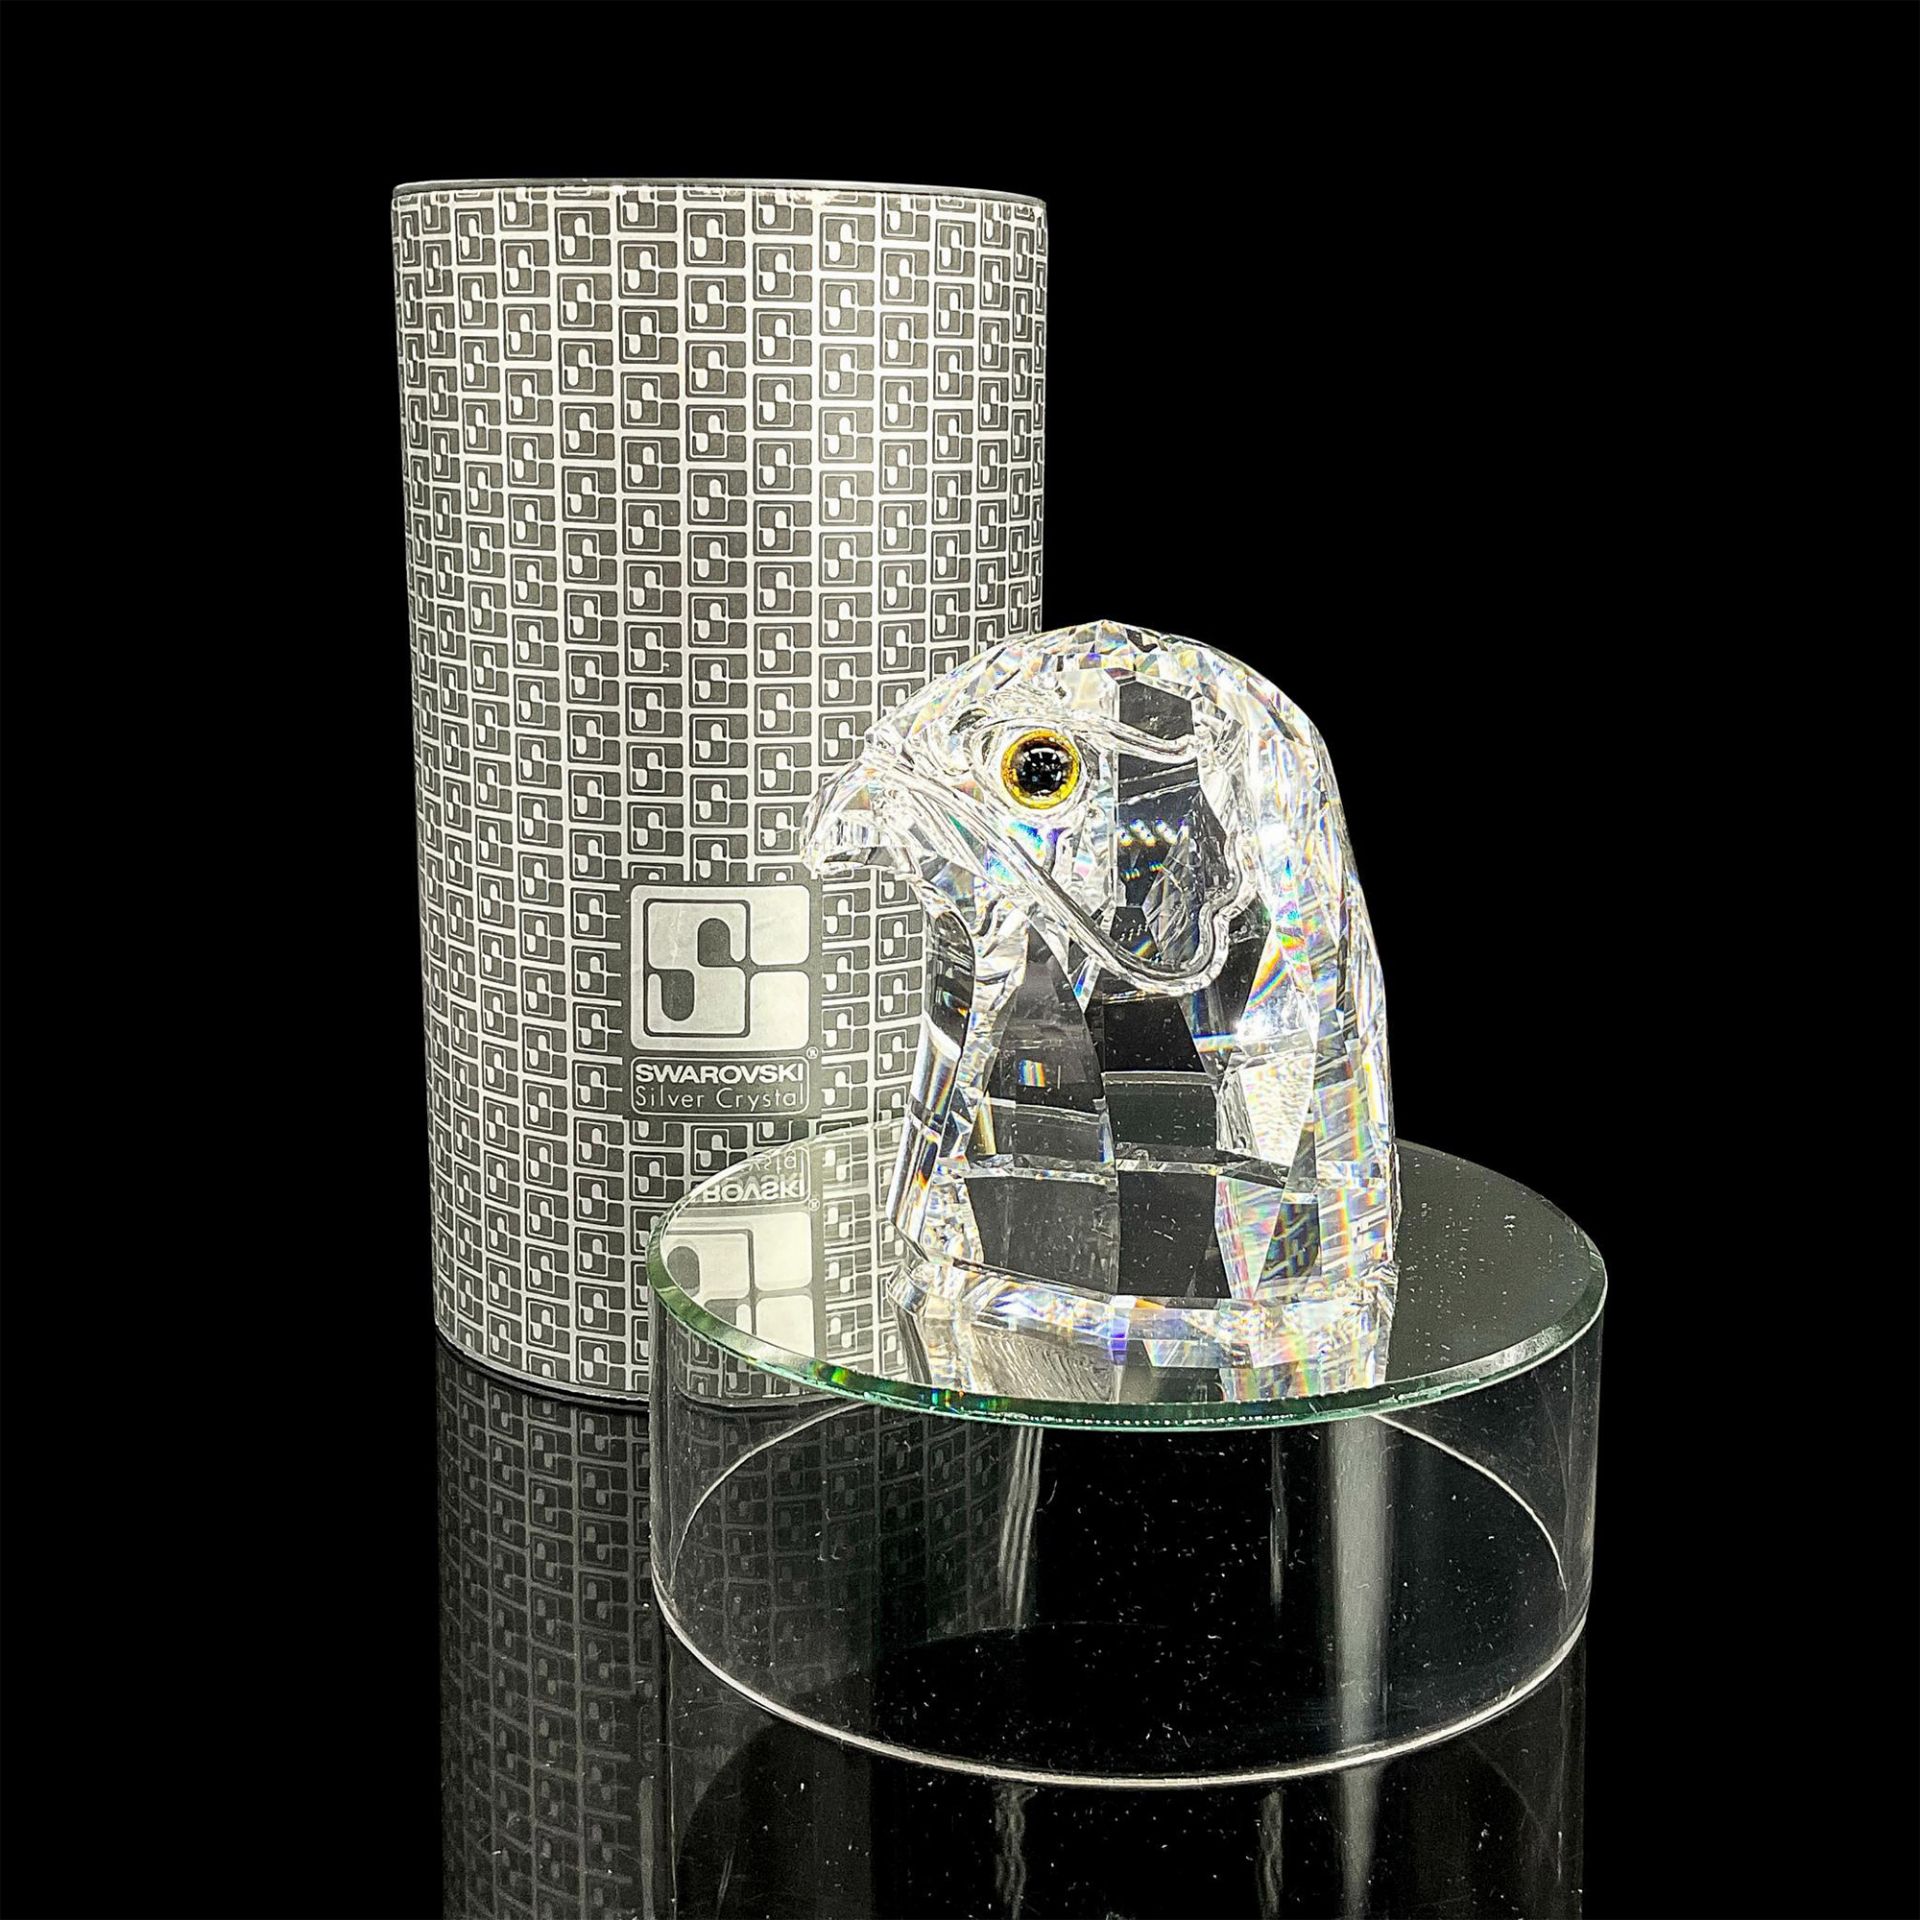 2pc Swarovski Crystal Bust, Falcon Head and Mirror Stand - Image 6 of 6